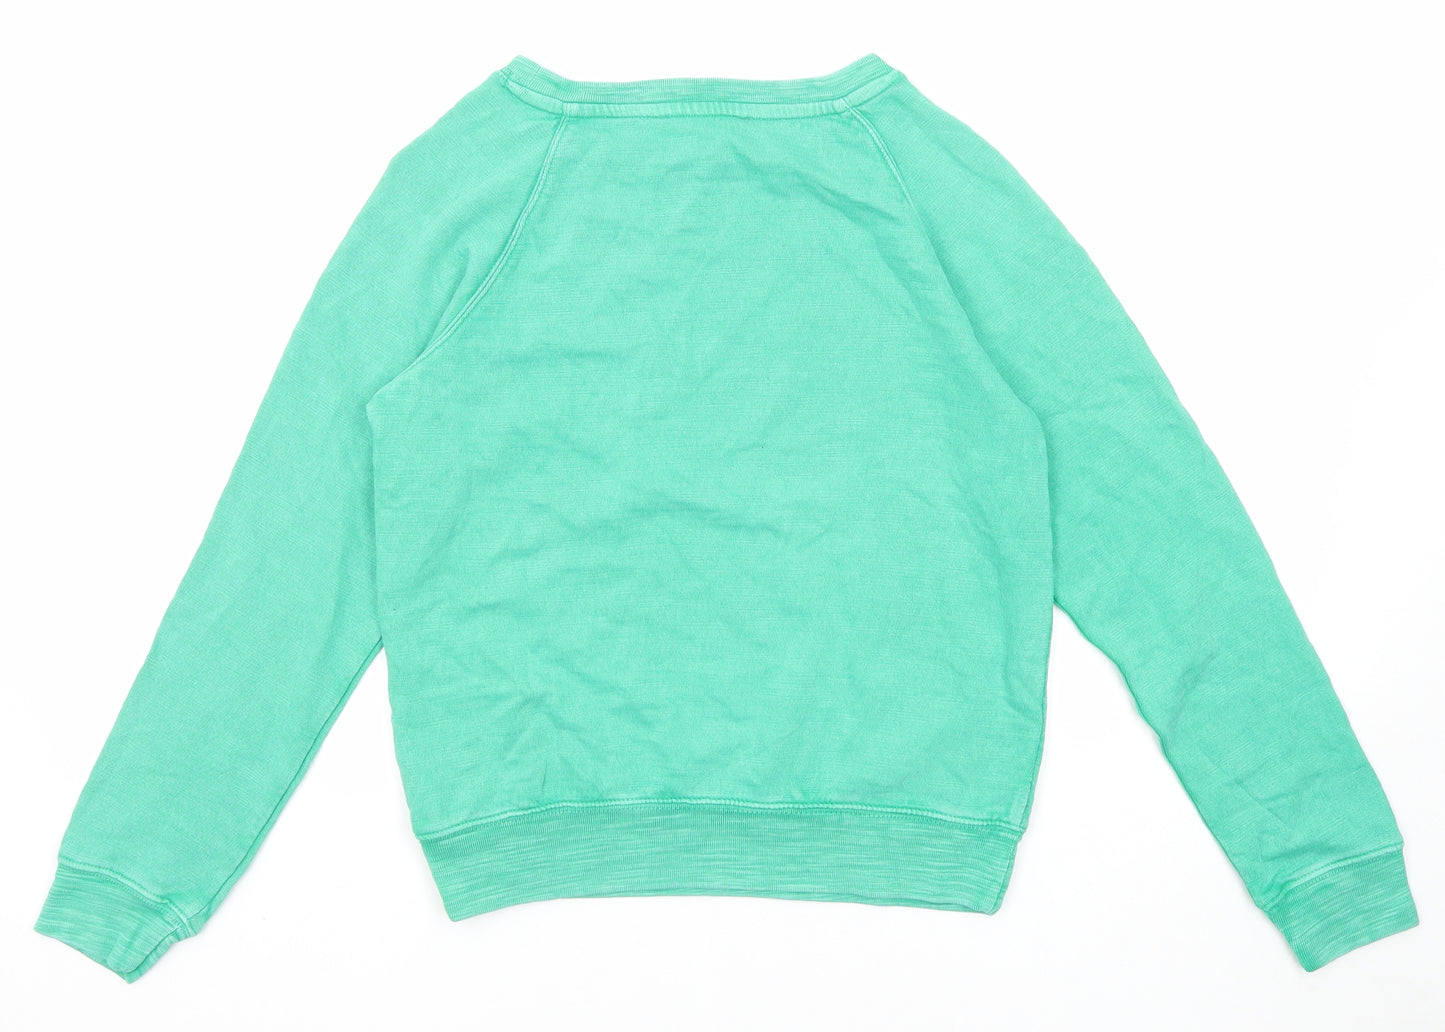 Marks and Spencer Womens Green Cotton Pullover Sweatshirt Size 6 Pullover